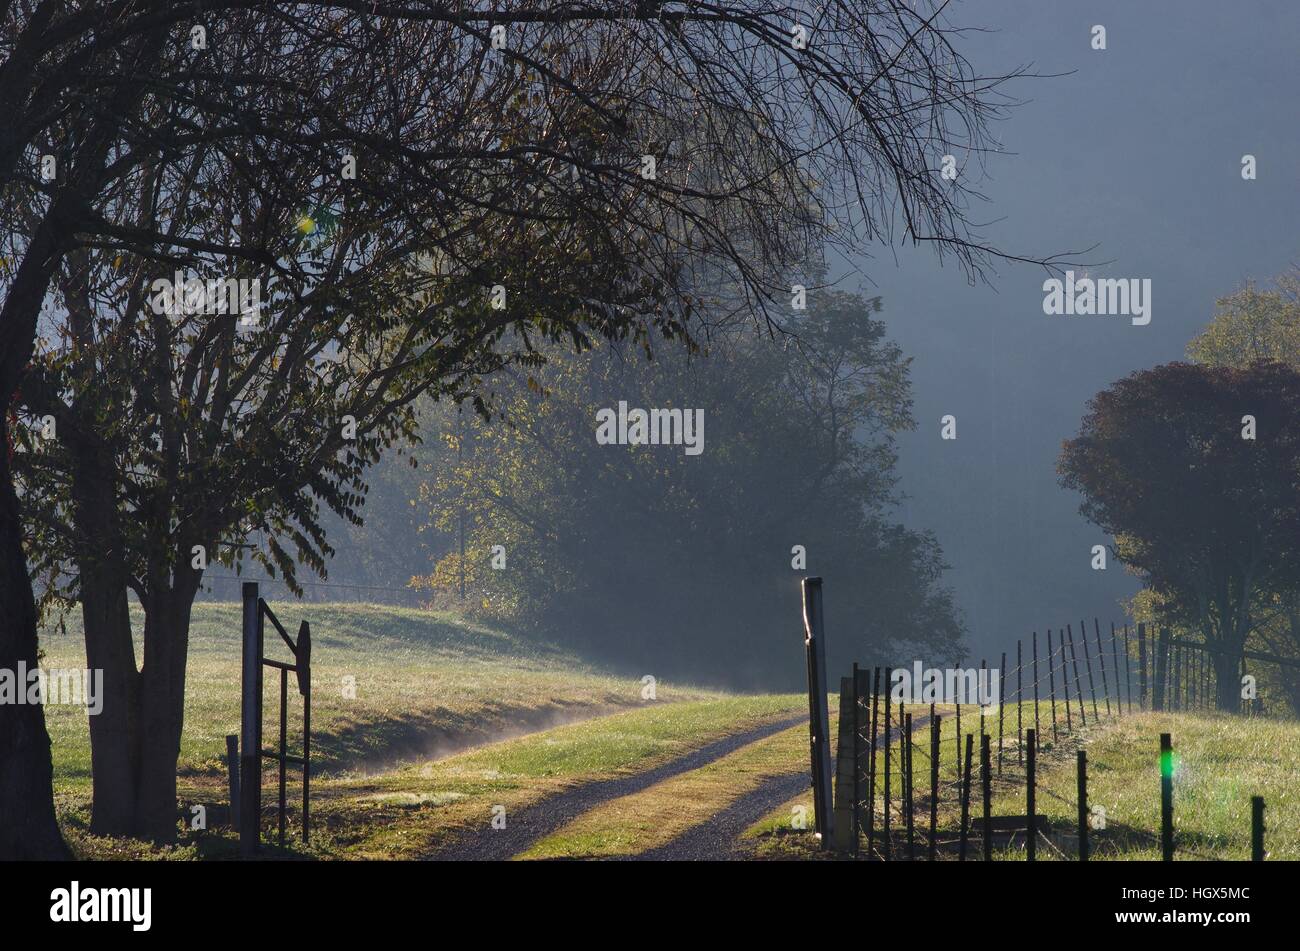 Gravel tire tracks, old metal gate, and barbed wire fence leading to foggy morning destination with large tree housing spiderweb Stock Photo